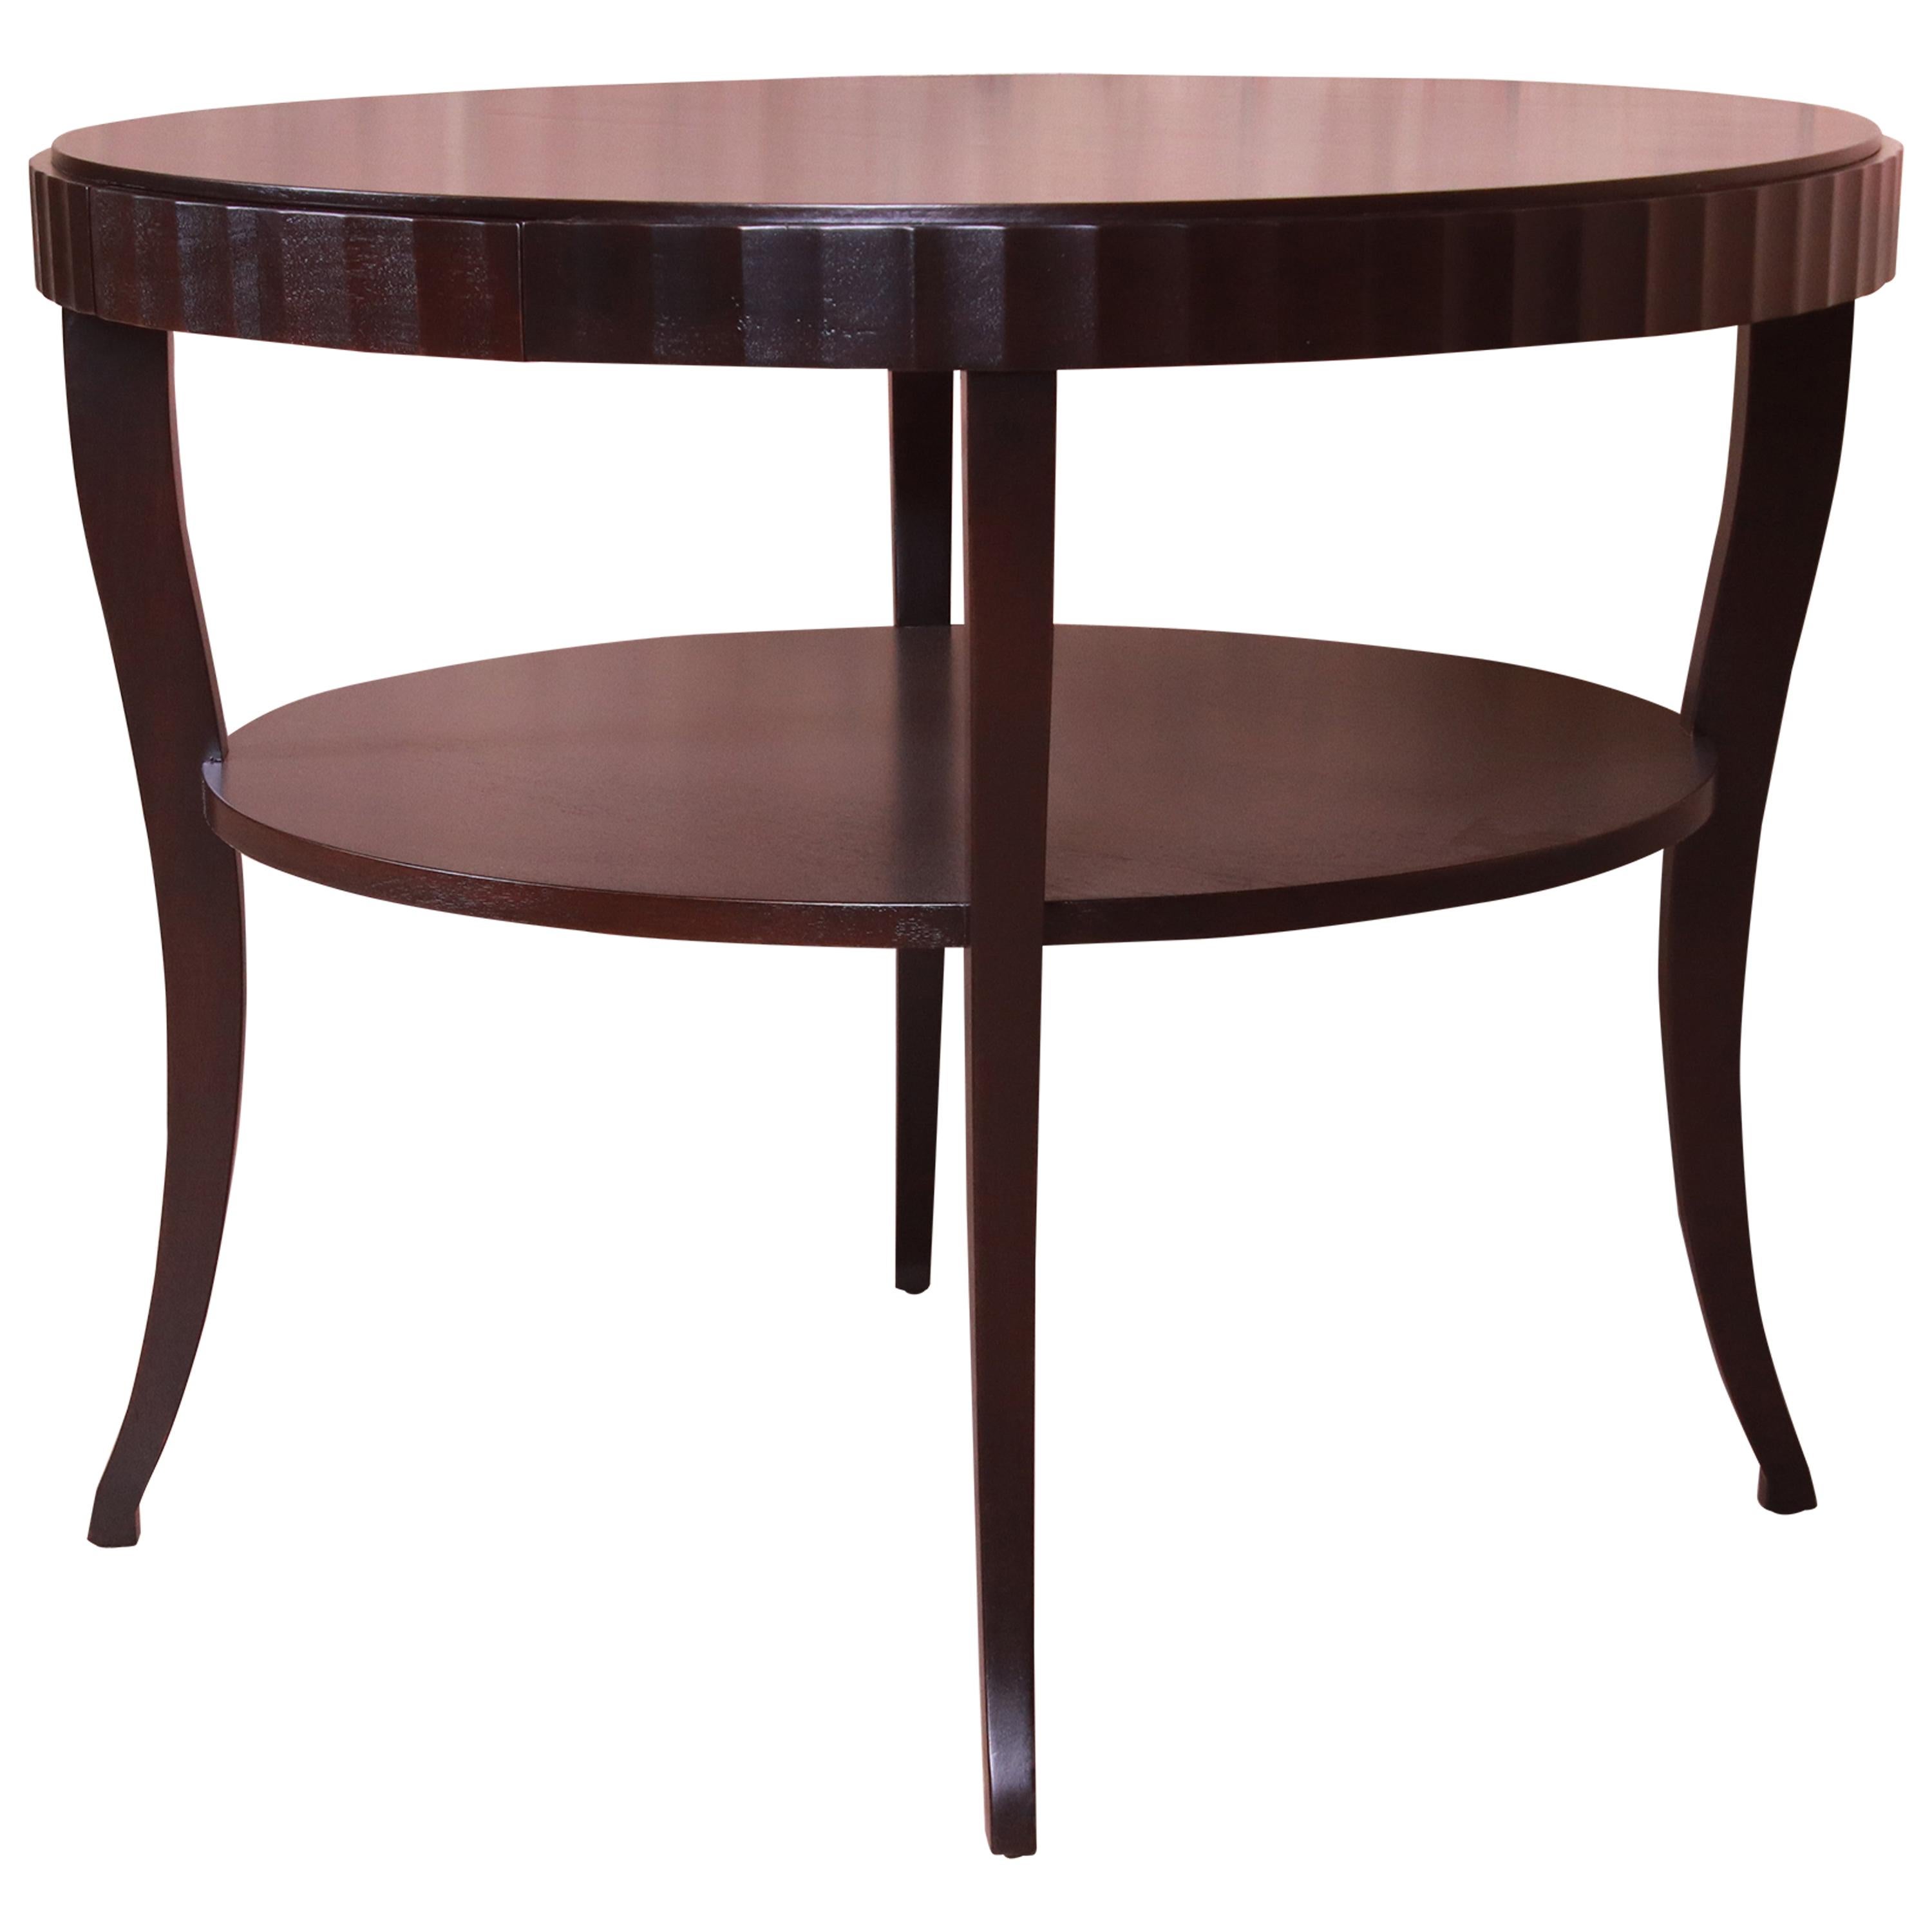 Barbara Barry for Baker Mahogany Two-Tier Center Table, Newly Refinished For Sale